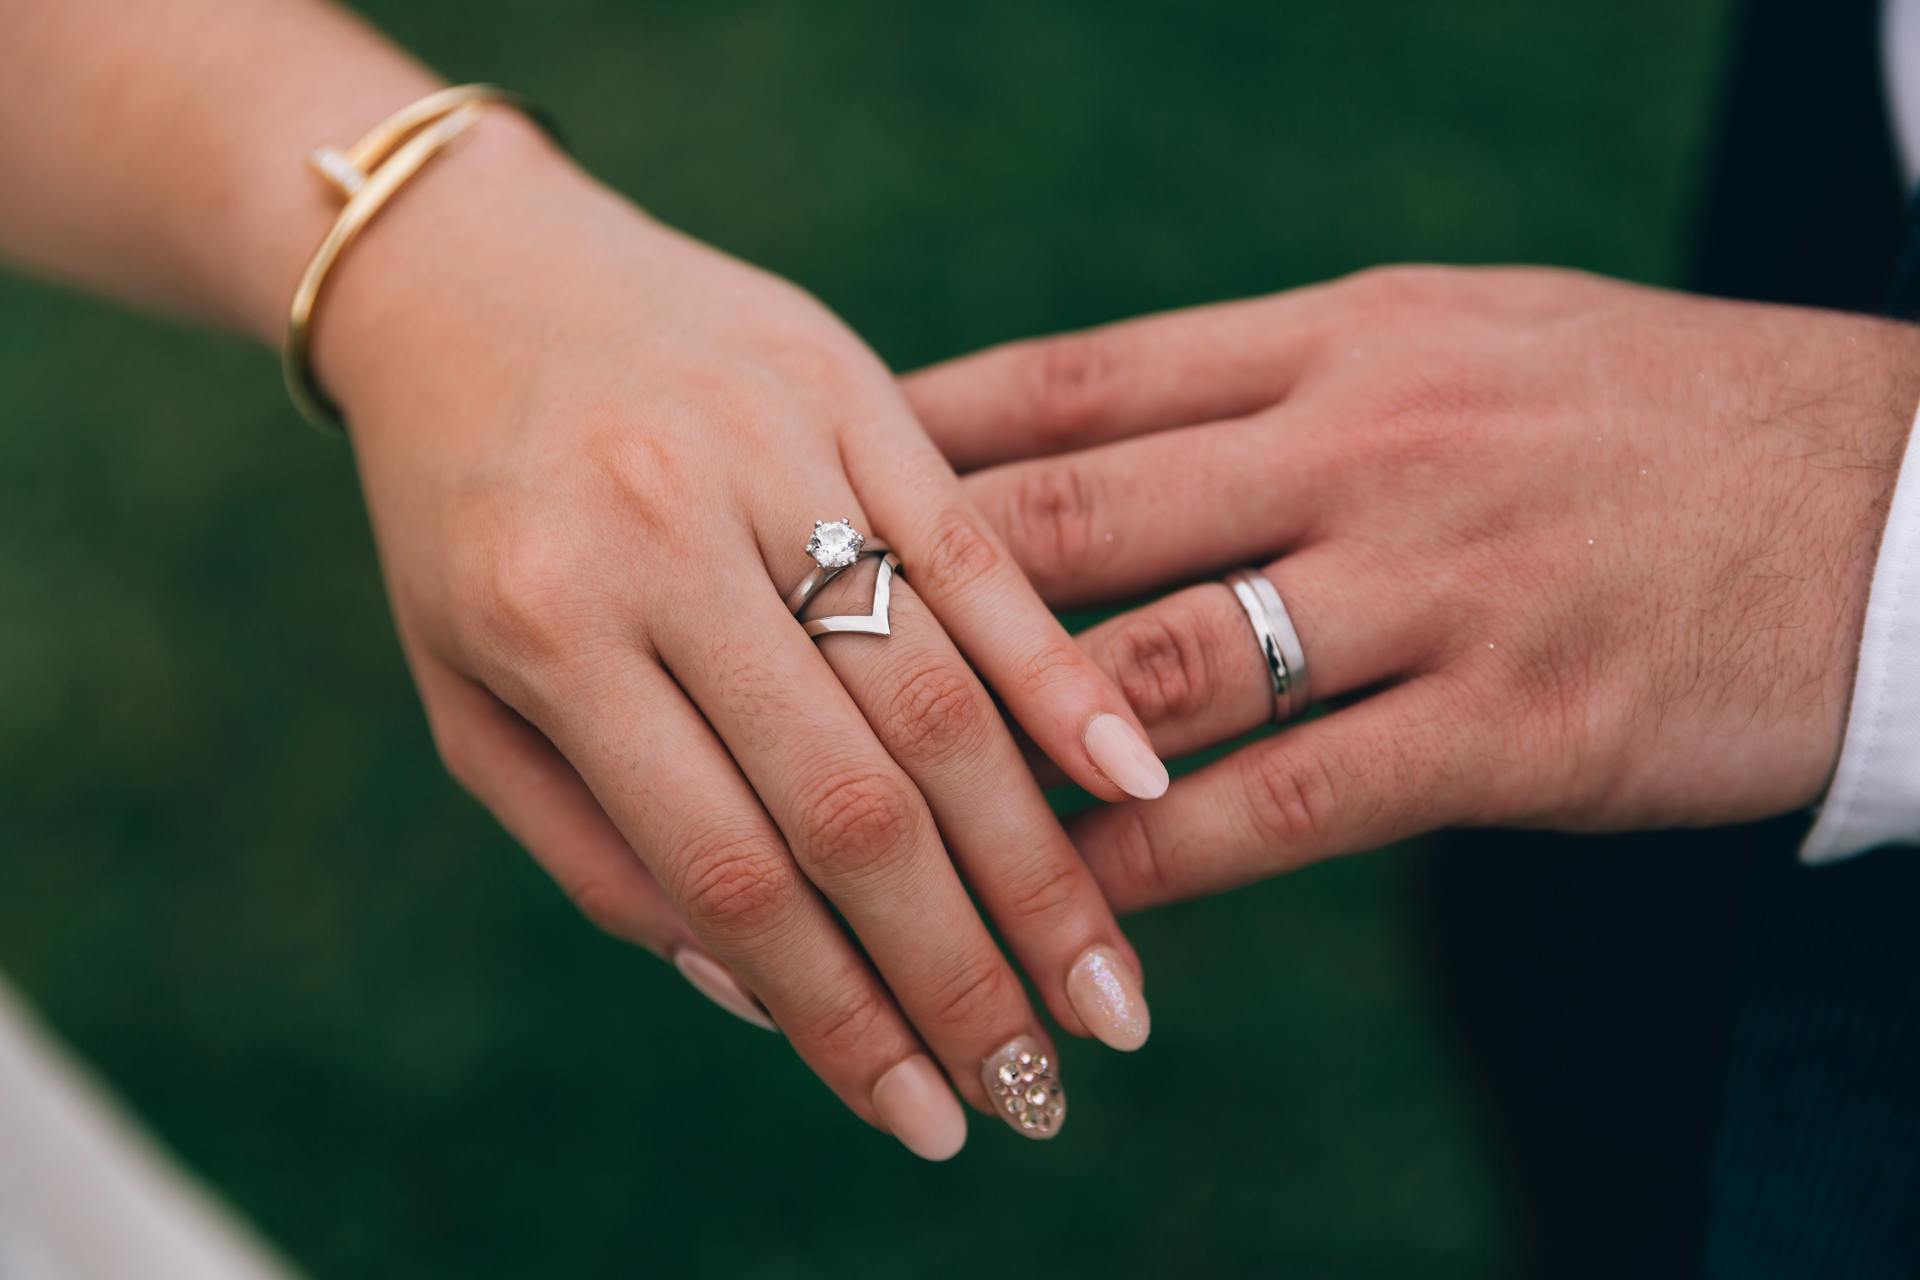 A couple showing their wedding rings | Source: Pexels